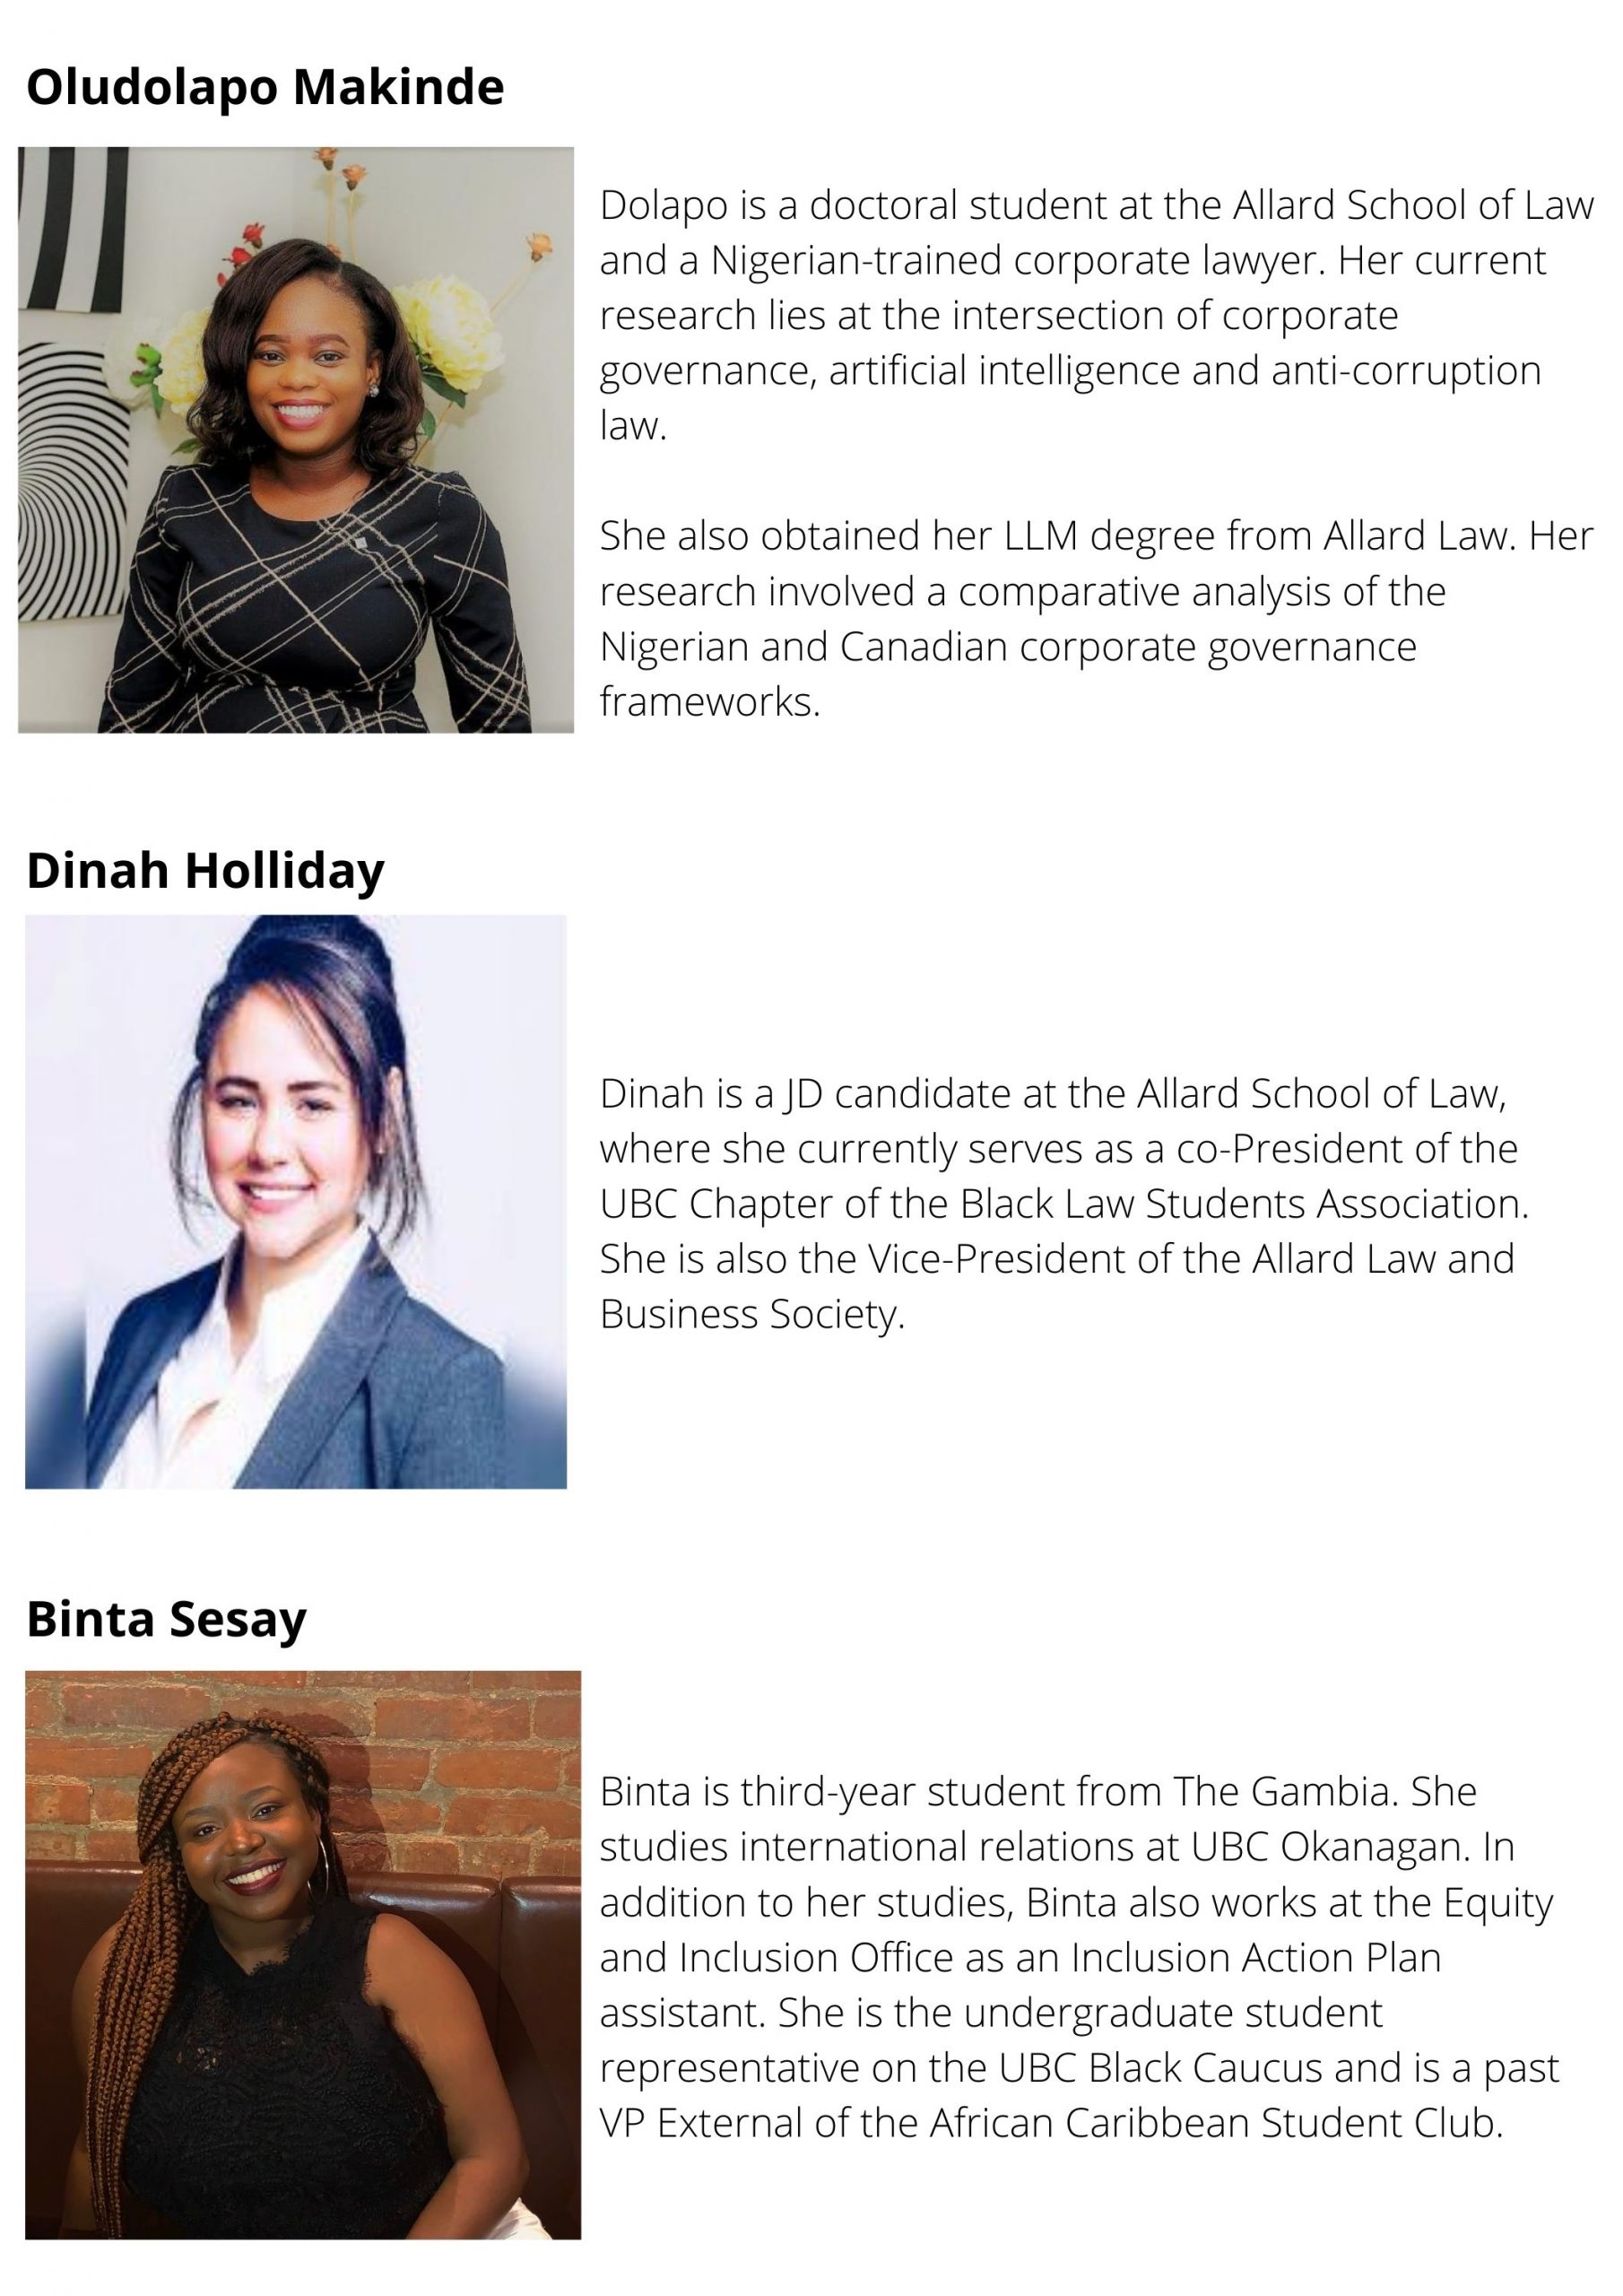 The description of the Re-imagining Agenda 2063 project team continues. The remaining team members described here are PhD student Oludolapo Makinde, JD student Dinah Holliday, and UBC Okanagan undergraduate student Binta Sesay.